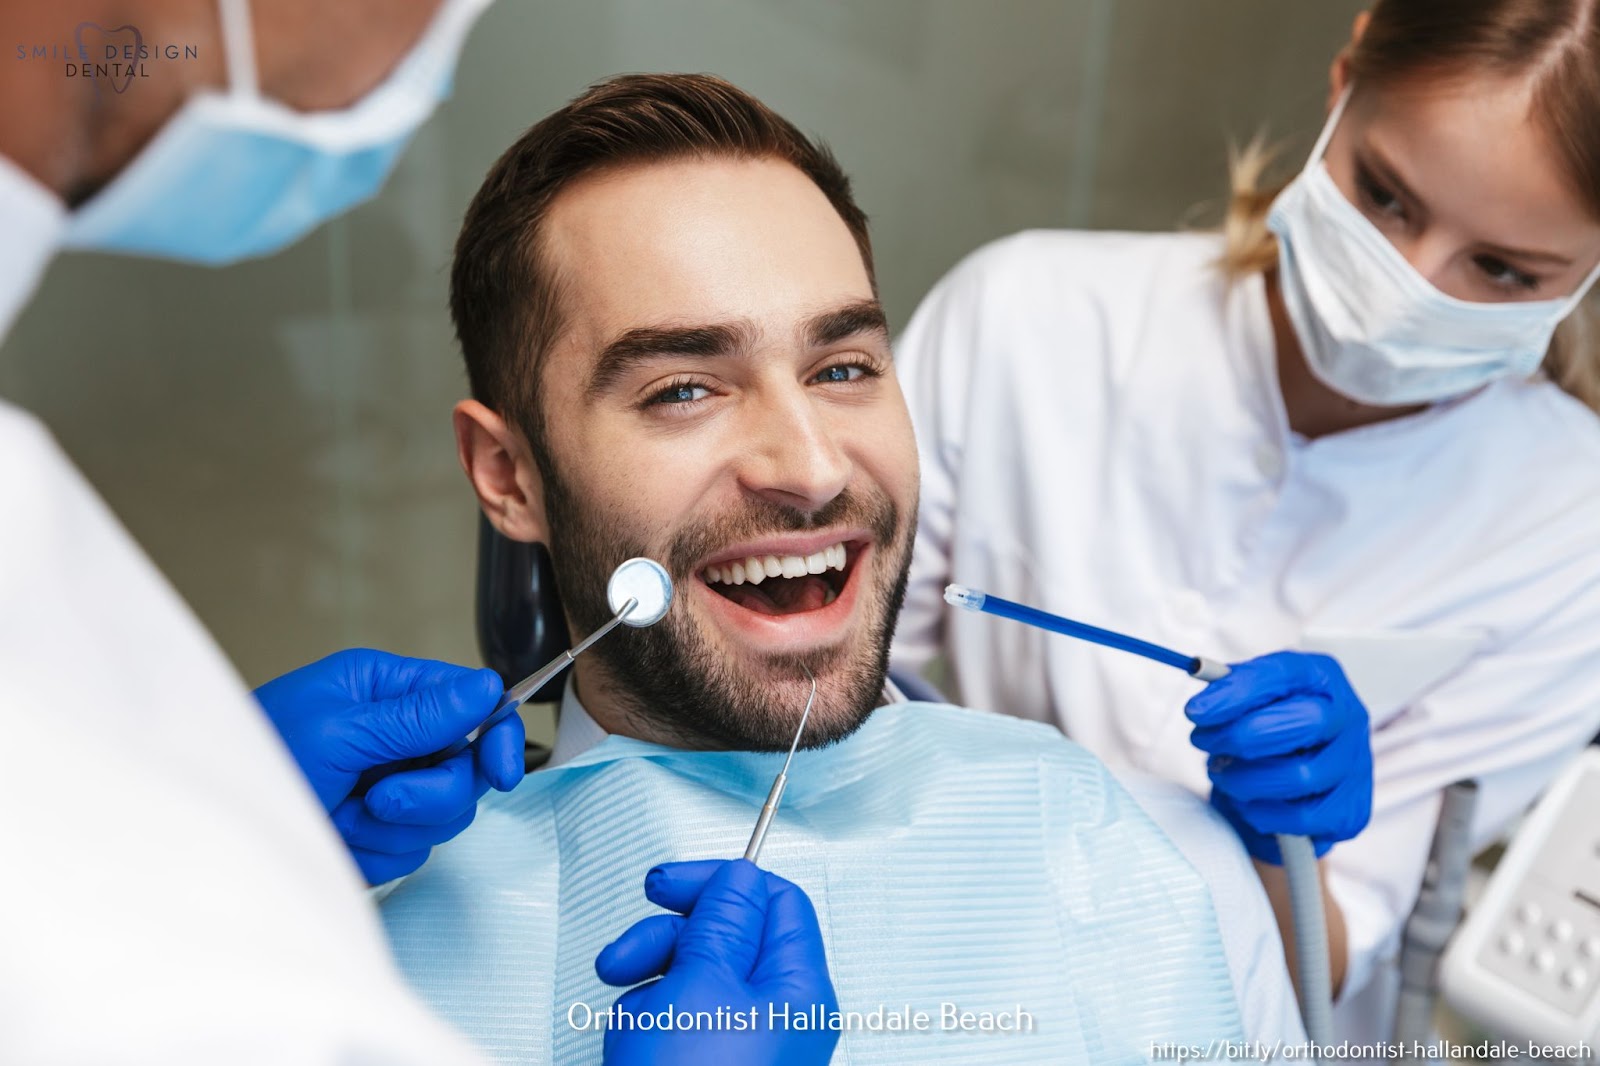 Smile Design Dental of Hallandale Beach Shares What Sets the Practice ...